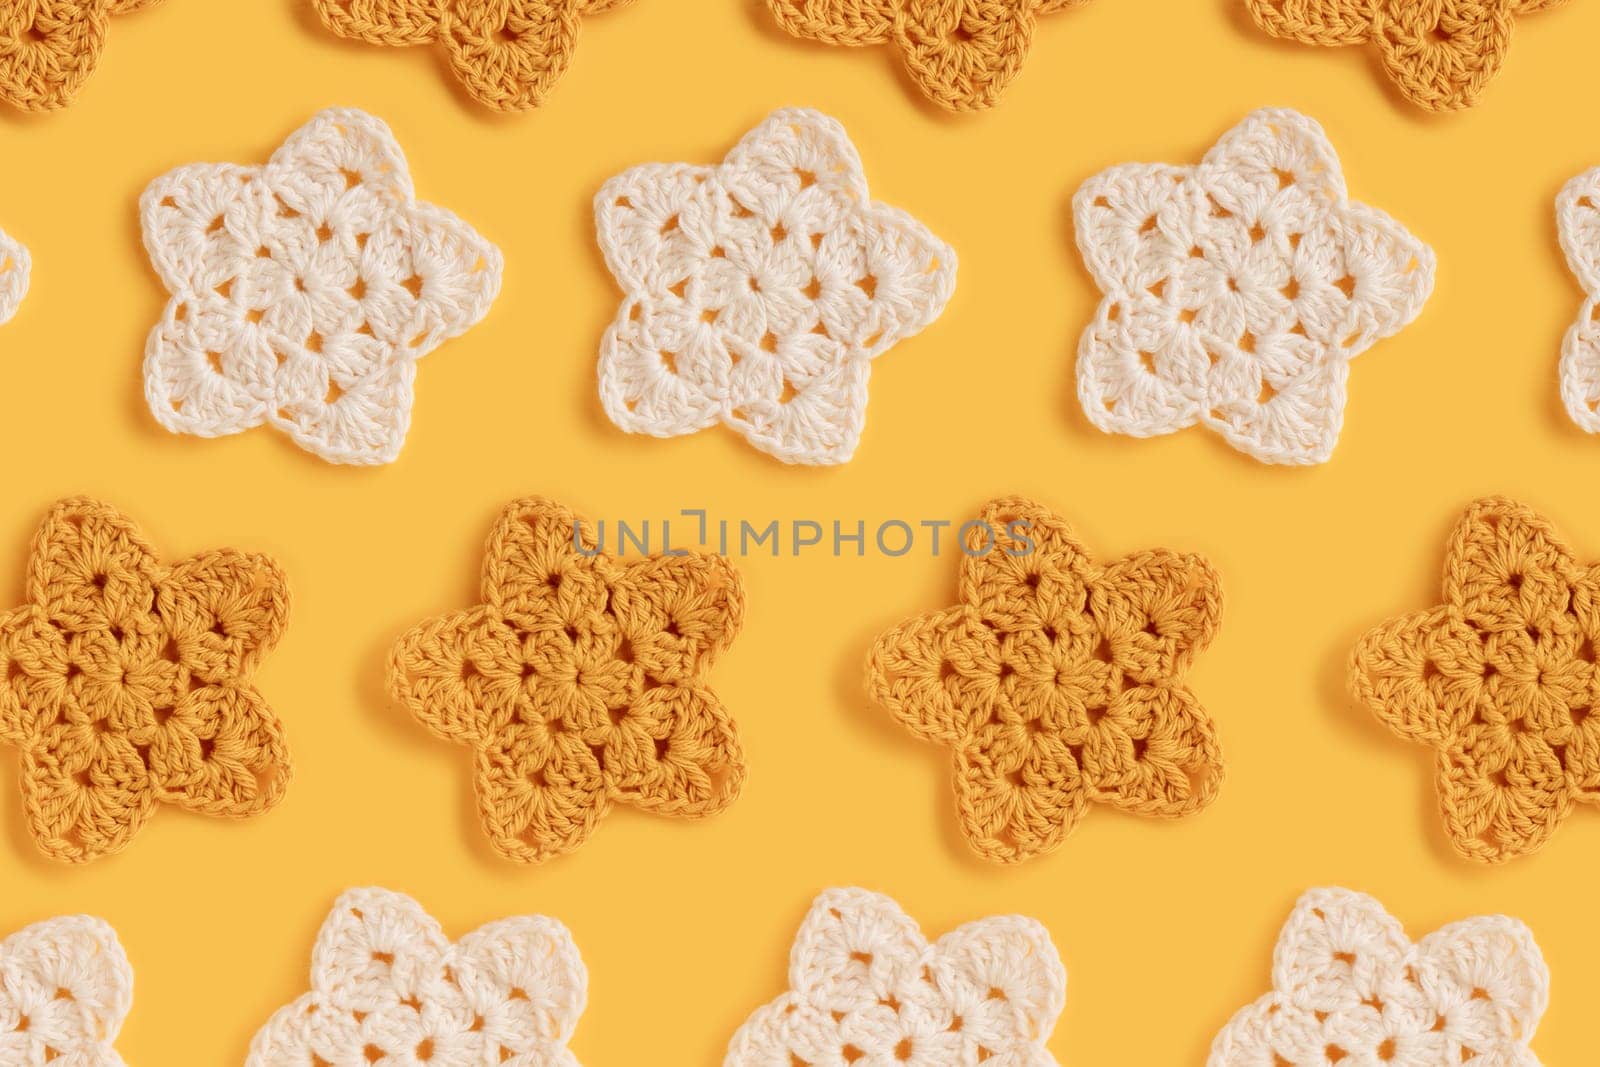 White and yellow crocheted stars pattern on a yellow background